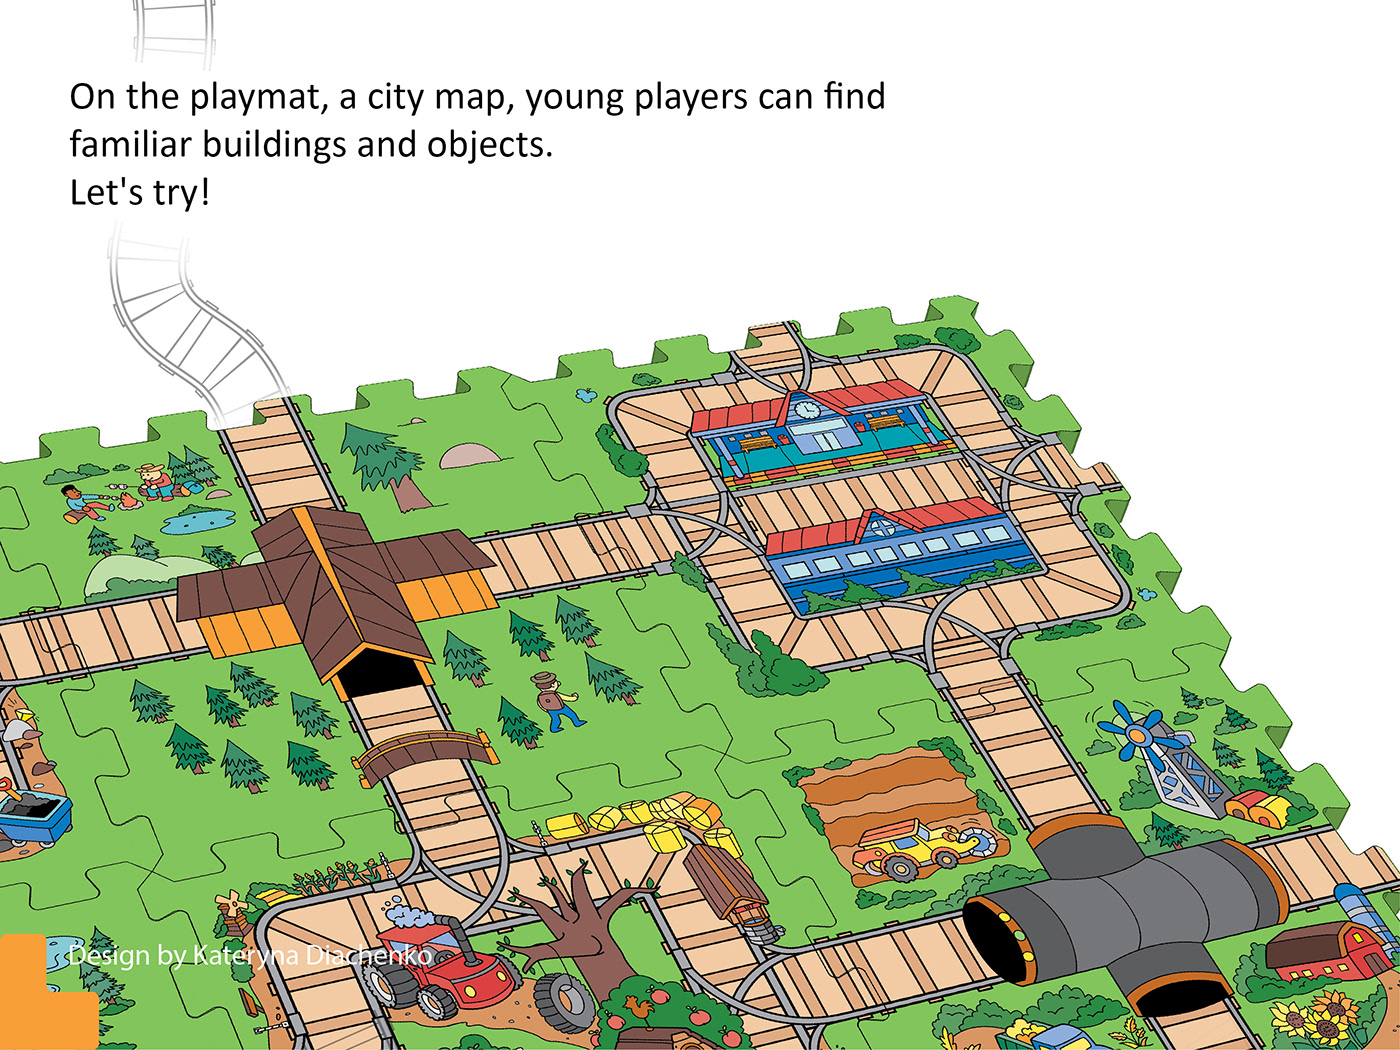 Playmat for children, Puzzle game design, Cartoon city map for kids